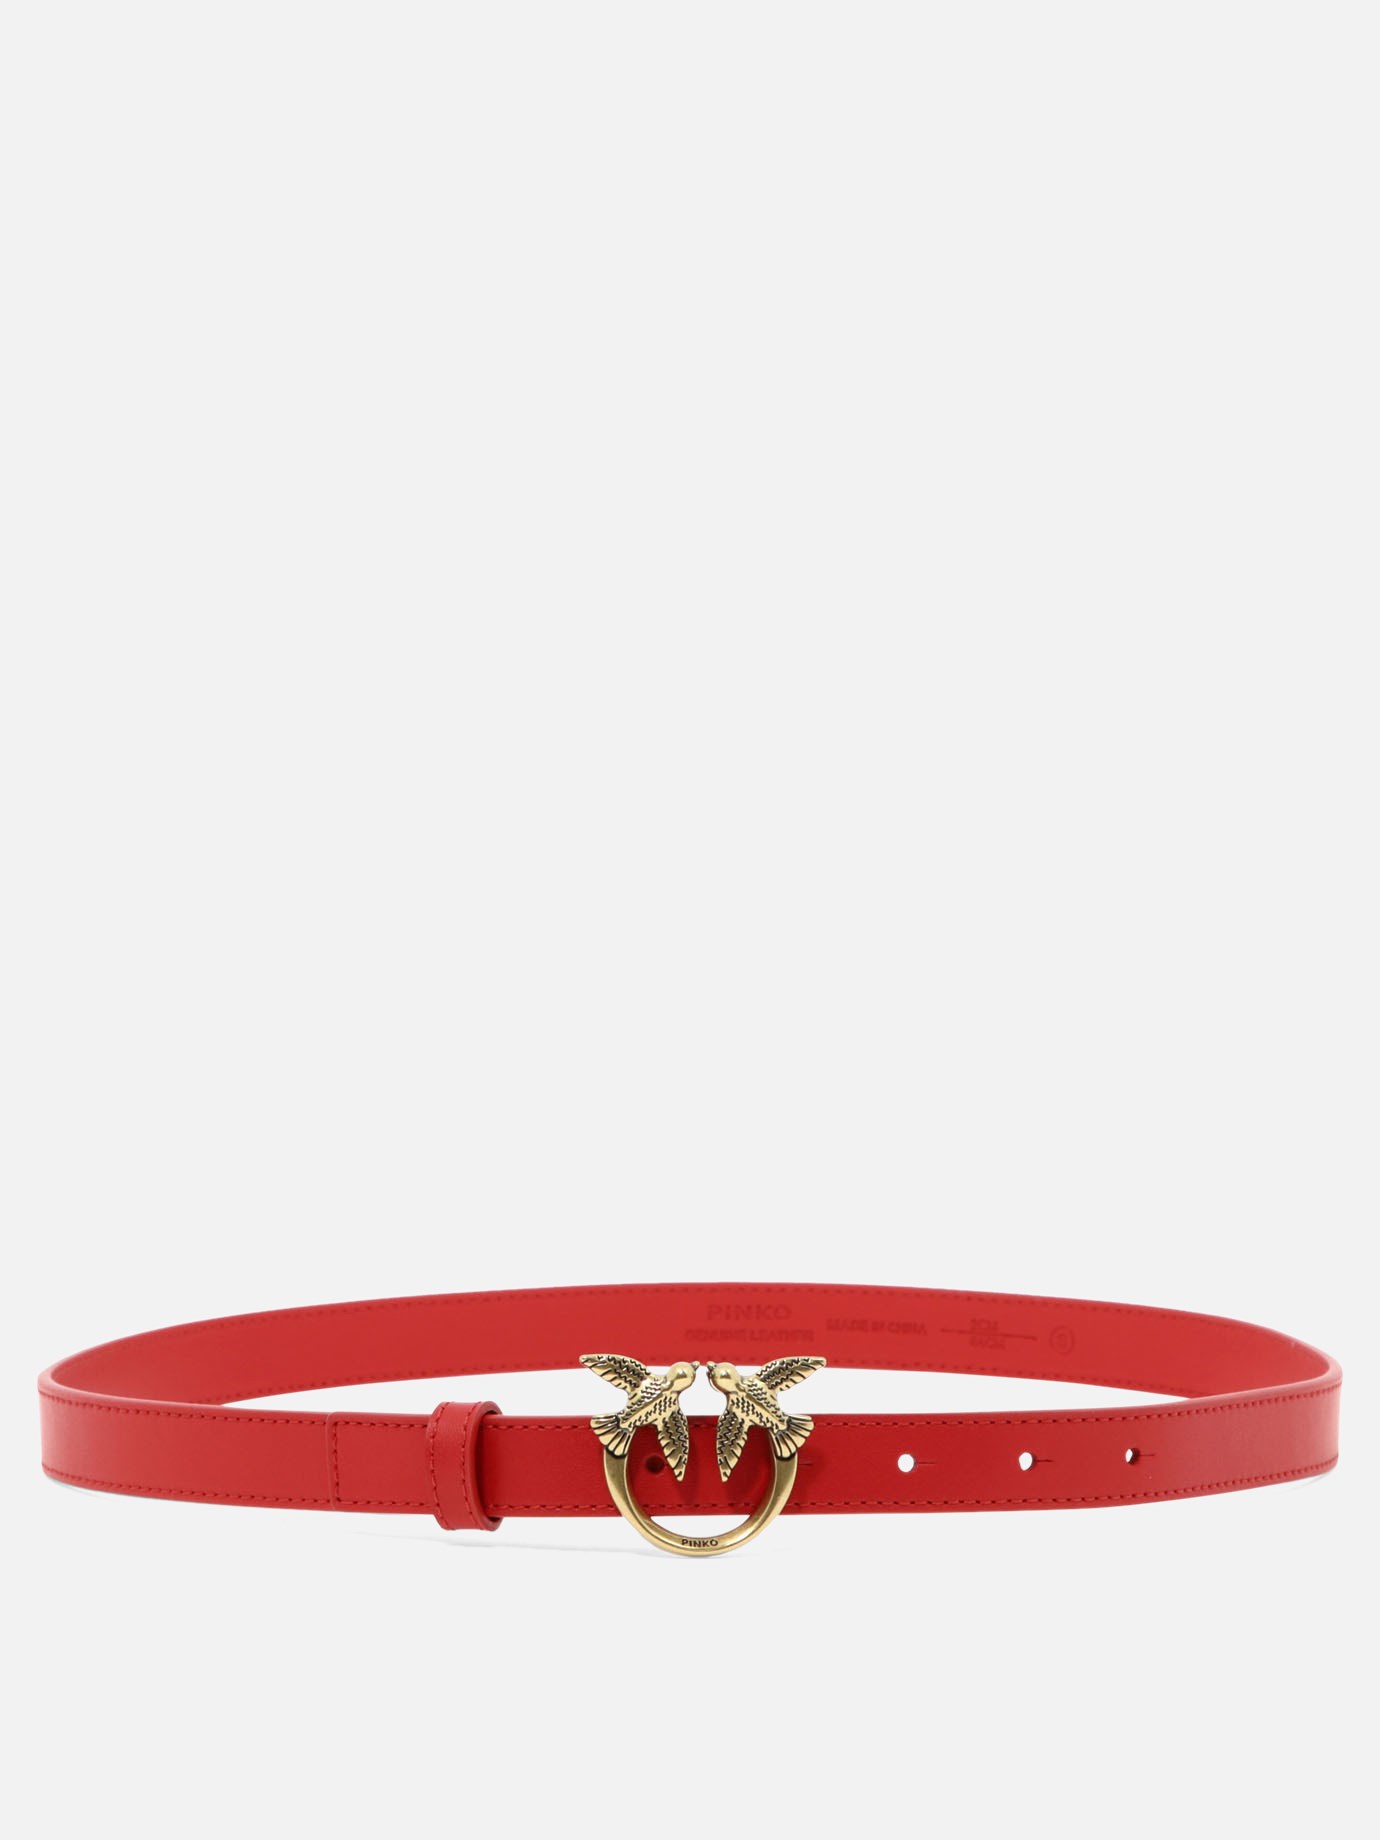  Love Berry Simply  belt by Pinko